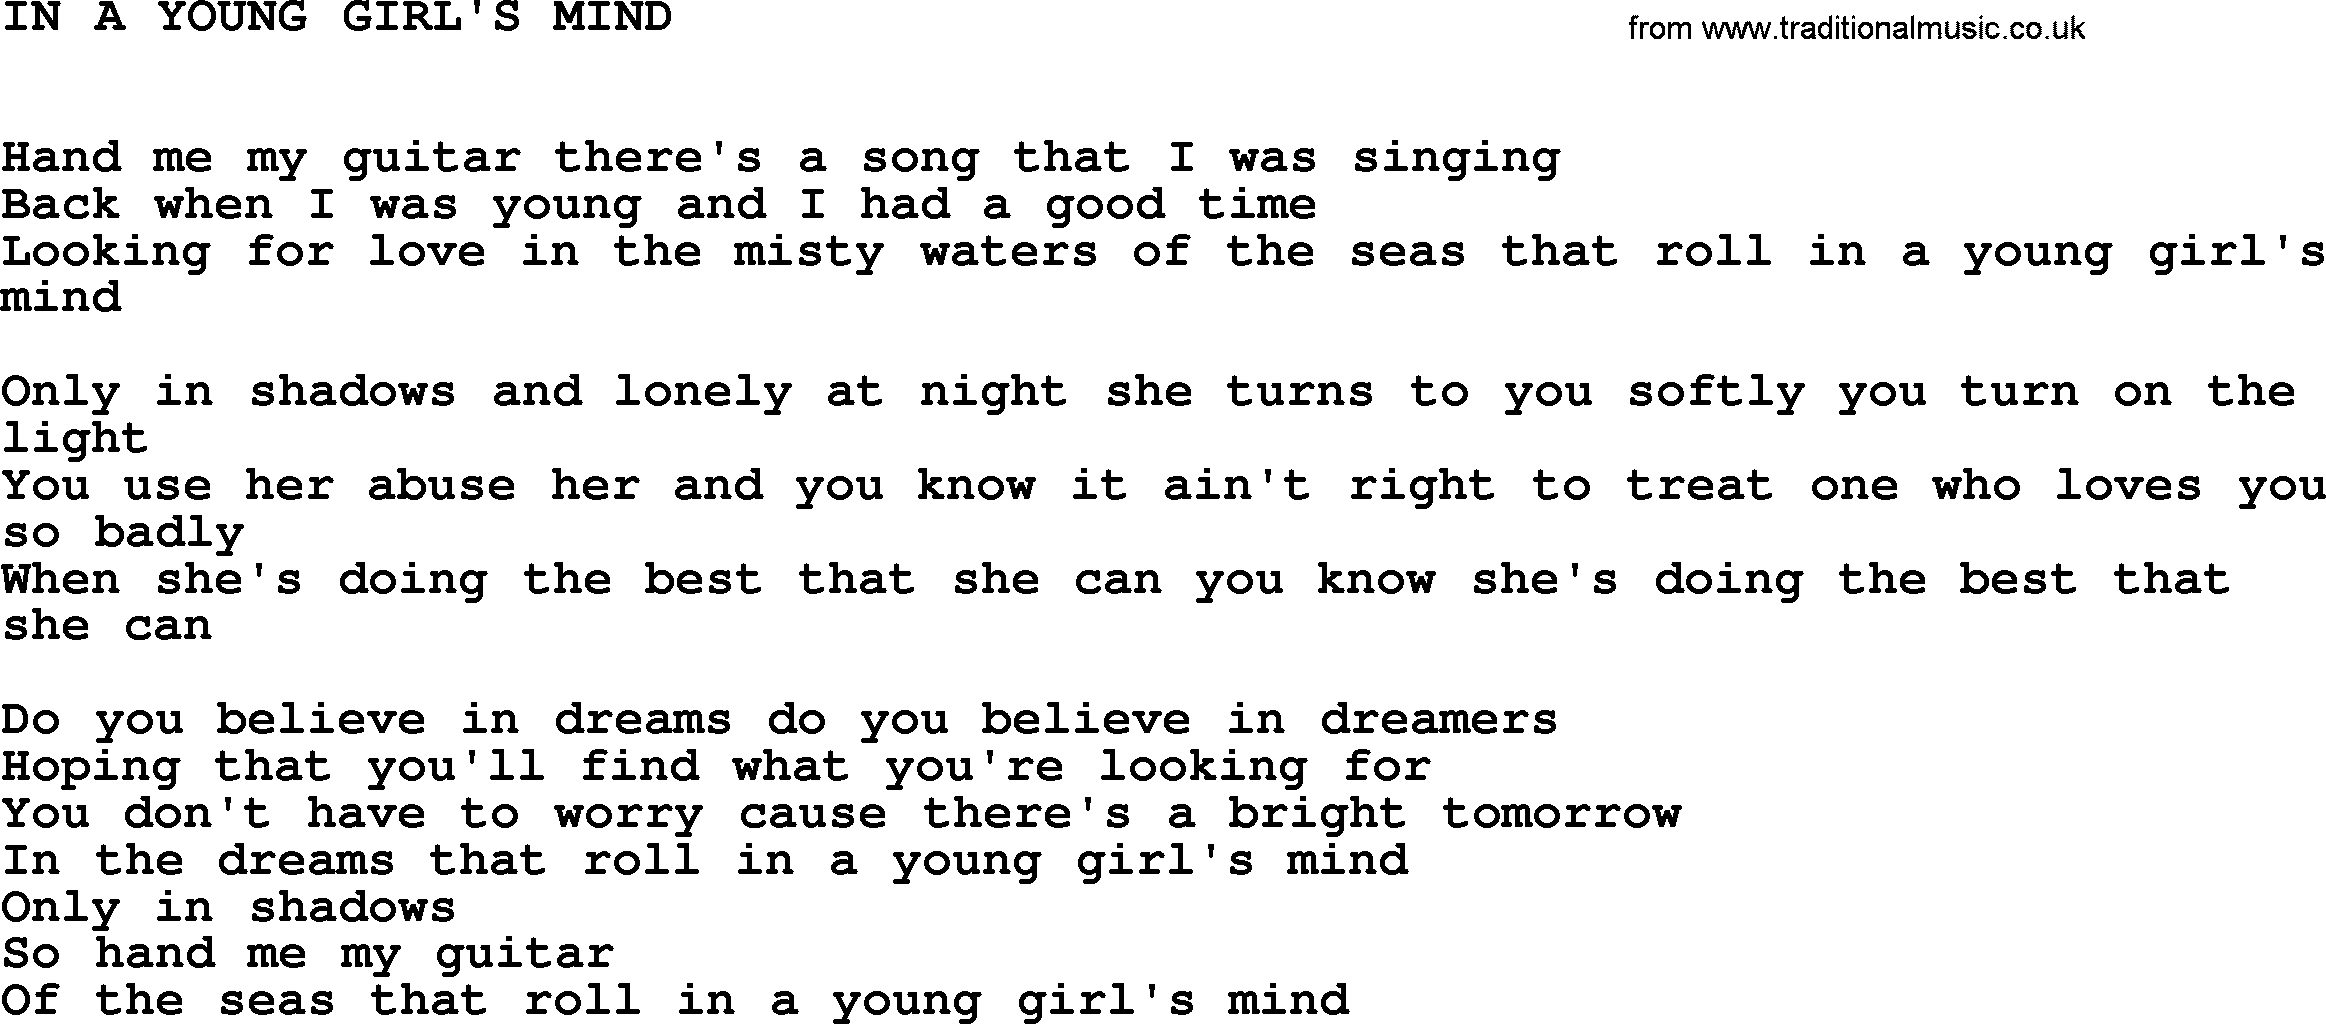 Johnny Cash song In A Young Girl's Mind.txt lyrics